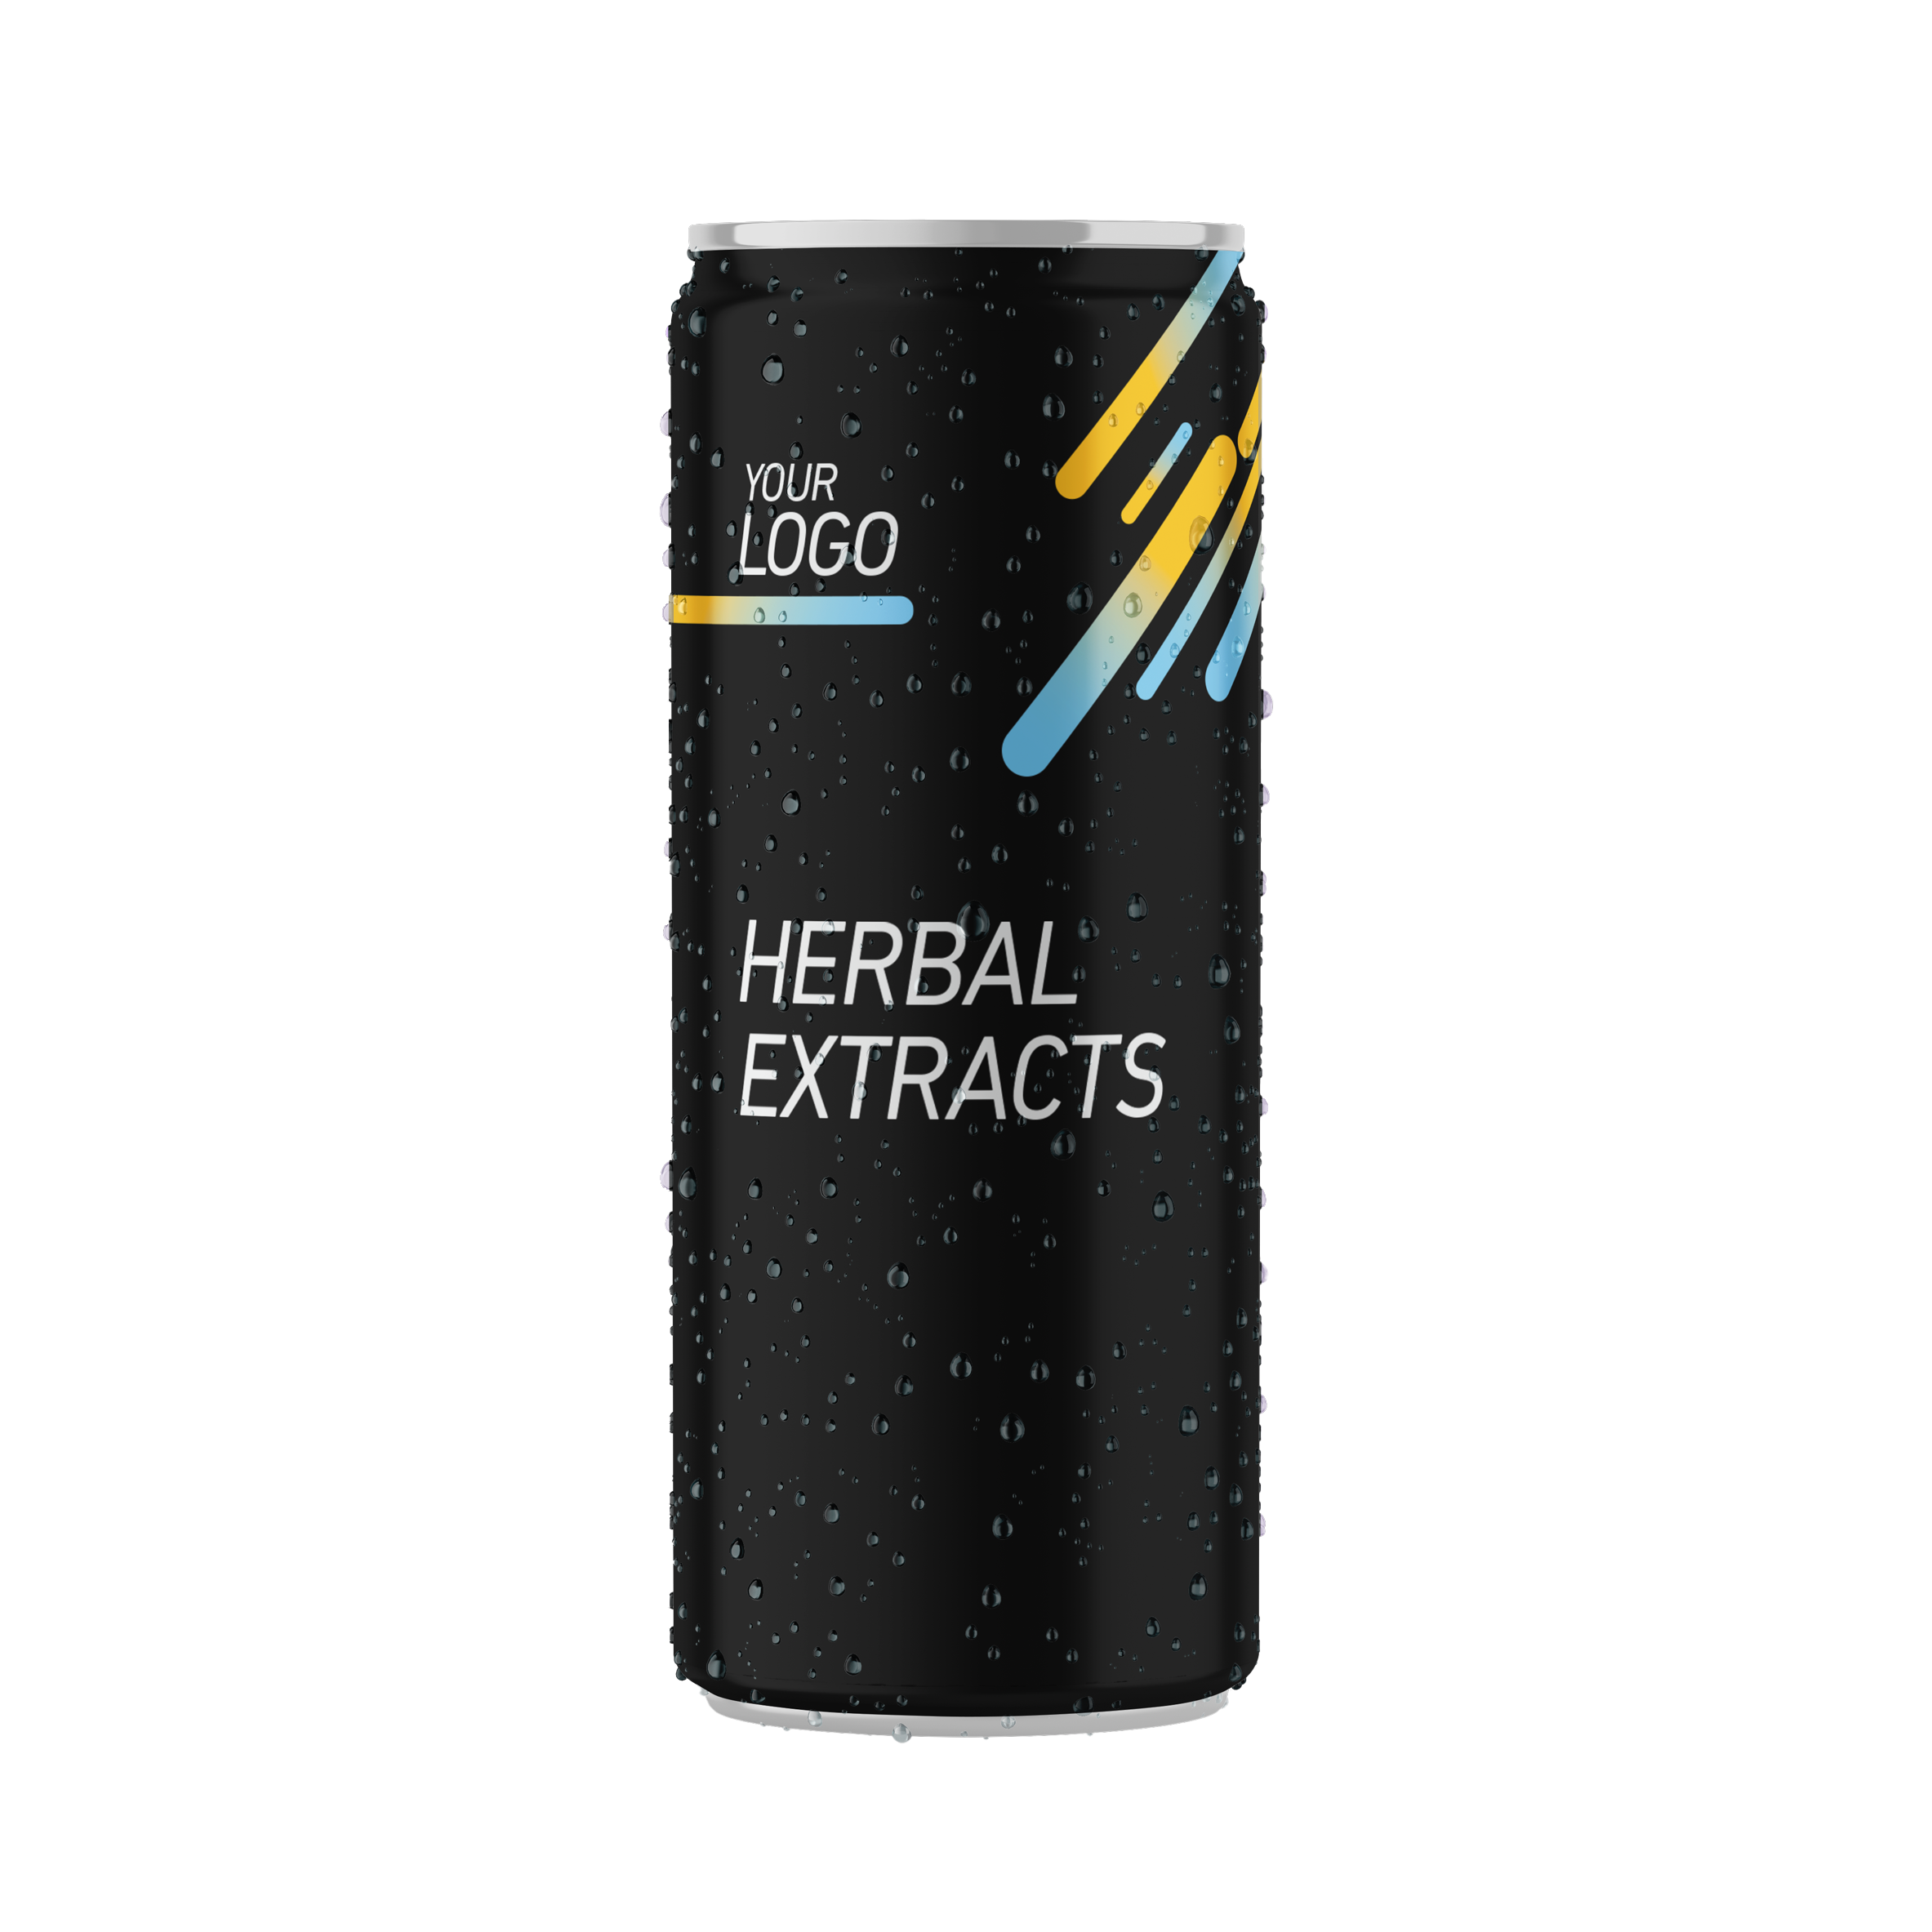 herbal-extracts-can